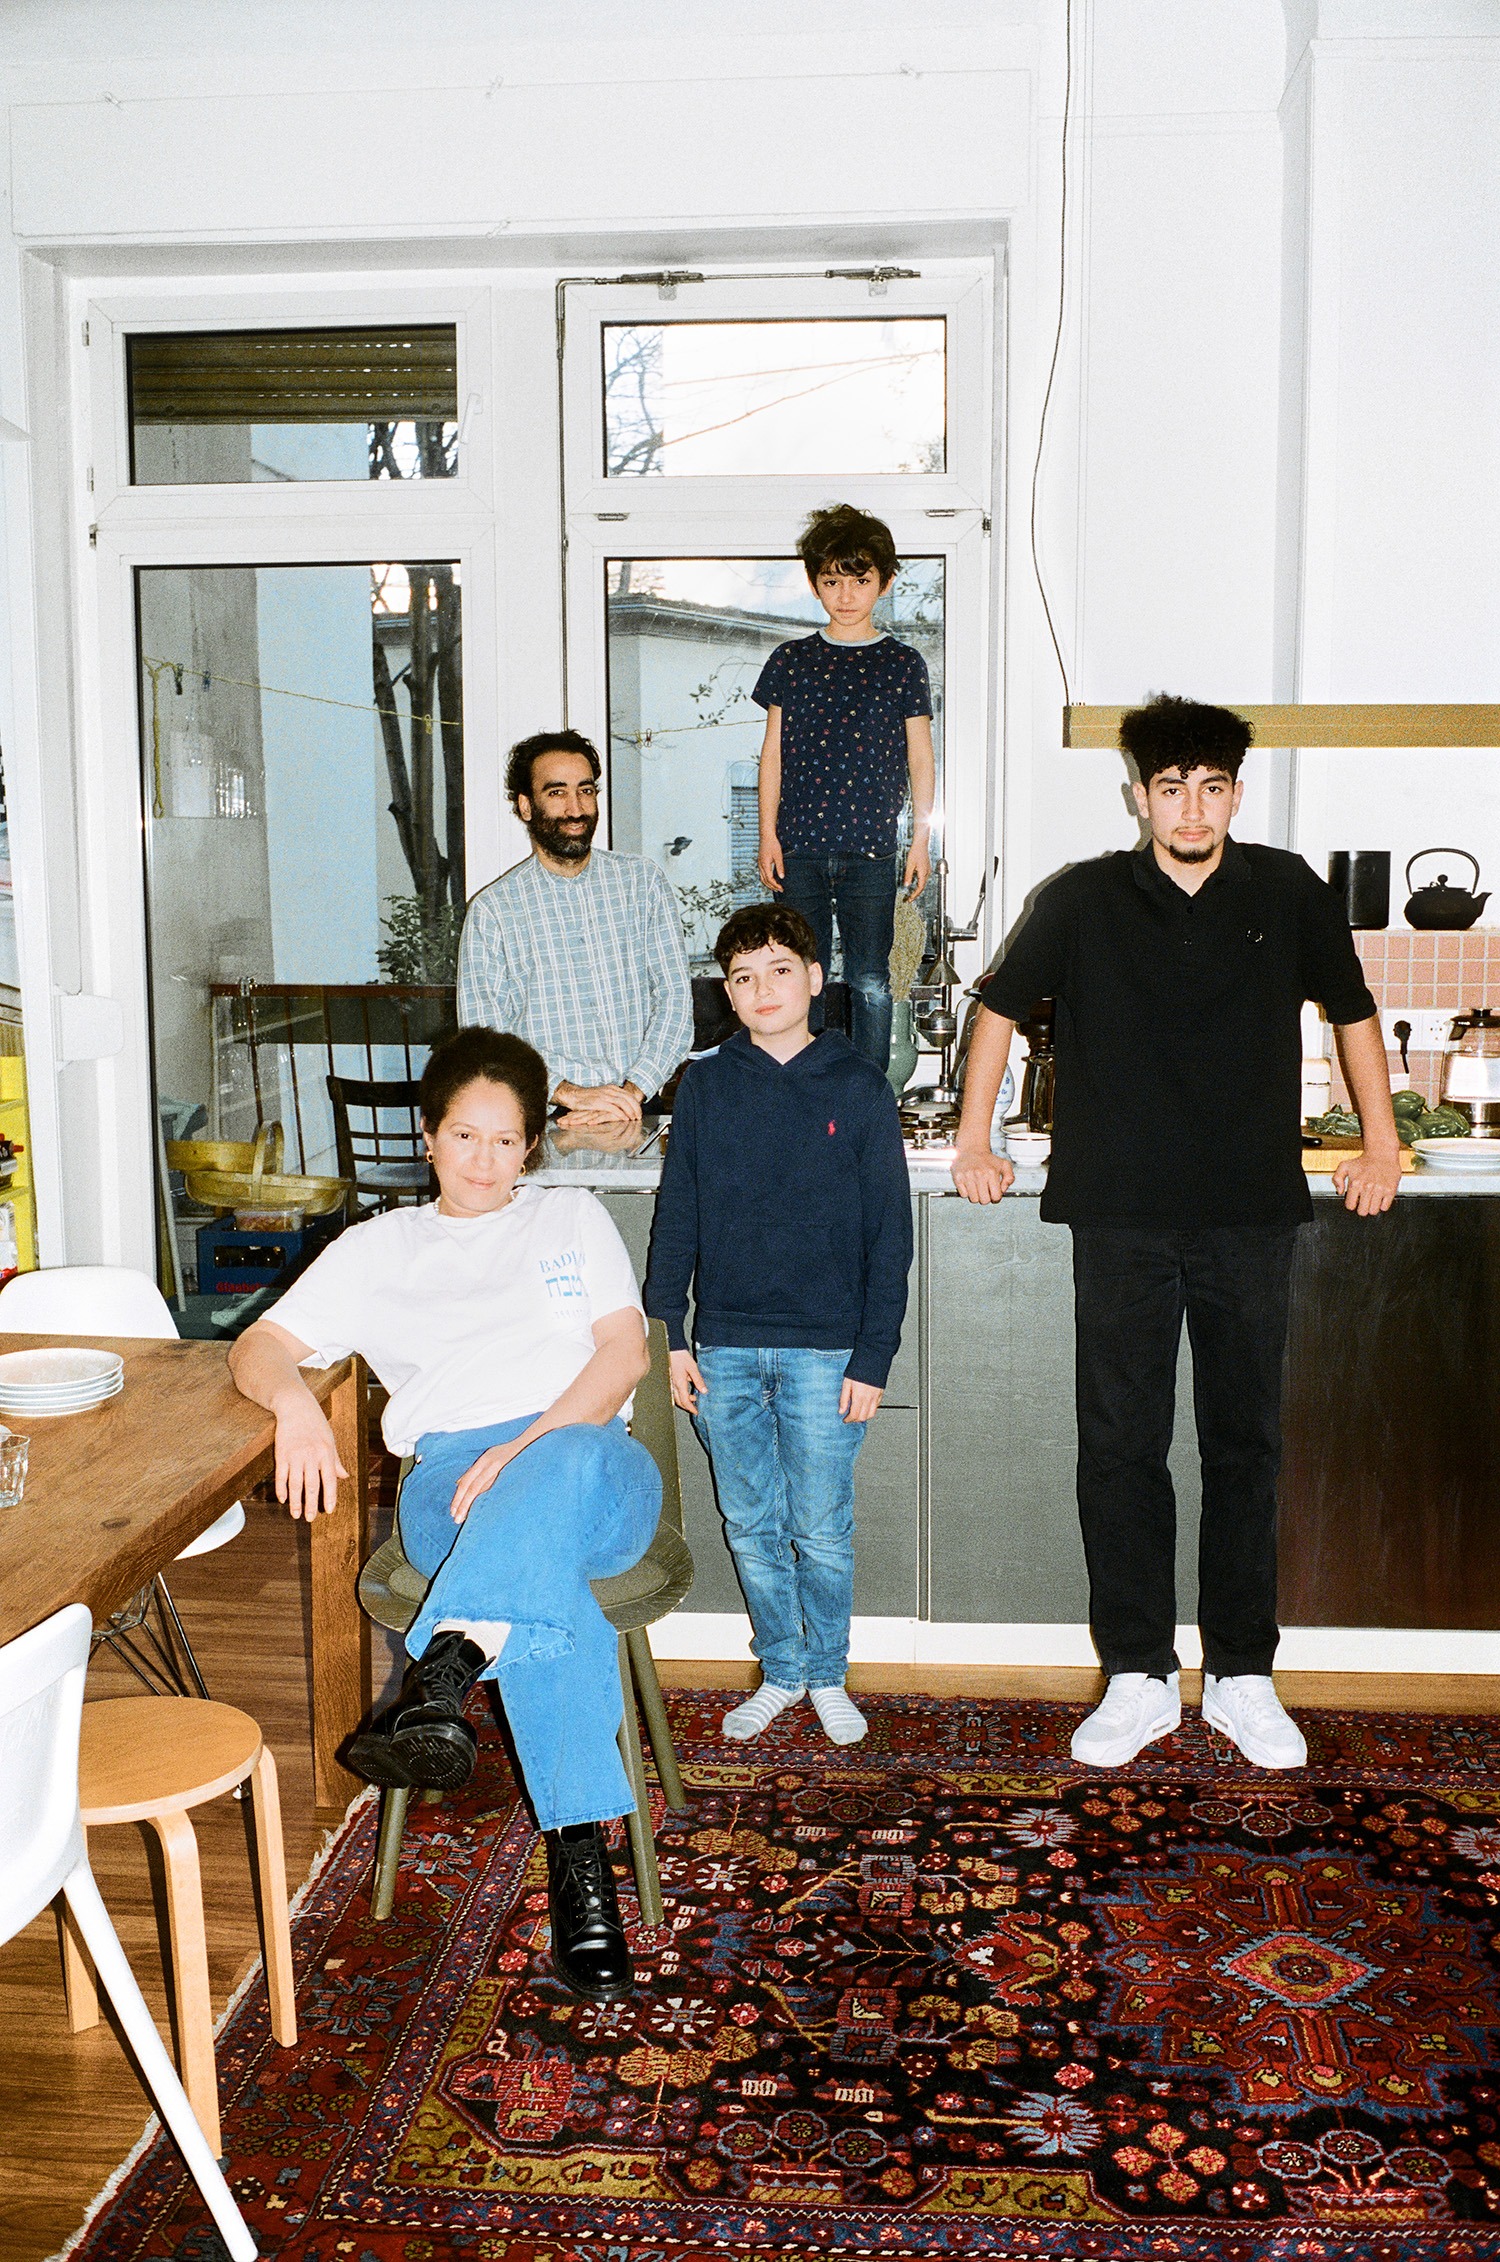 Badia and Family for Zeit Magazin 1 by Marc KRAUSE